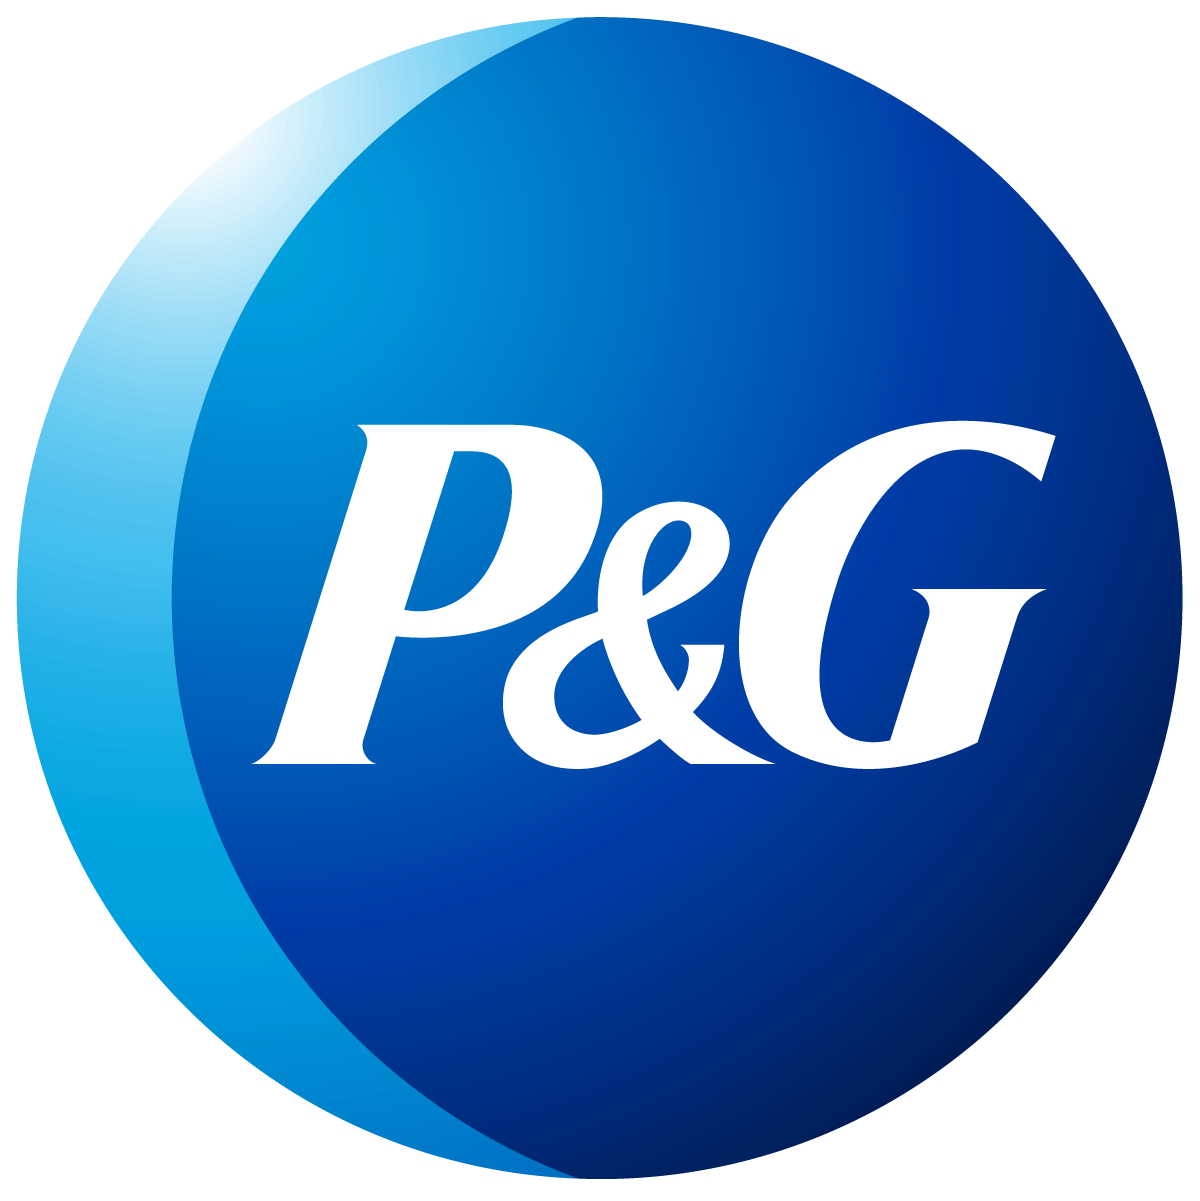 !Stay hydrated and enjoy Academic Year with P&G!